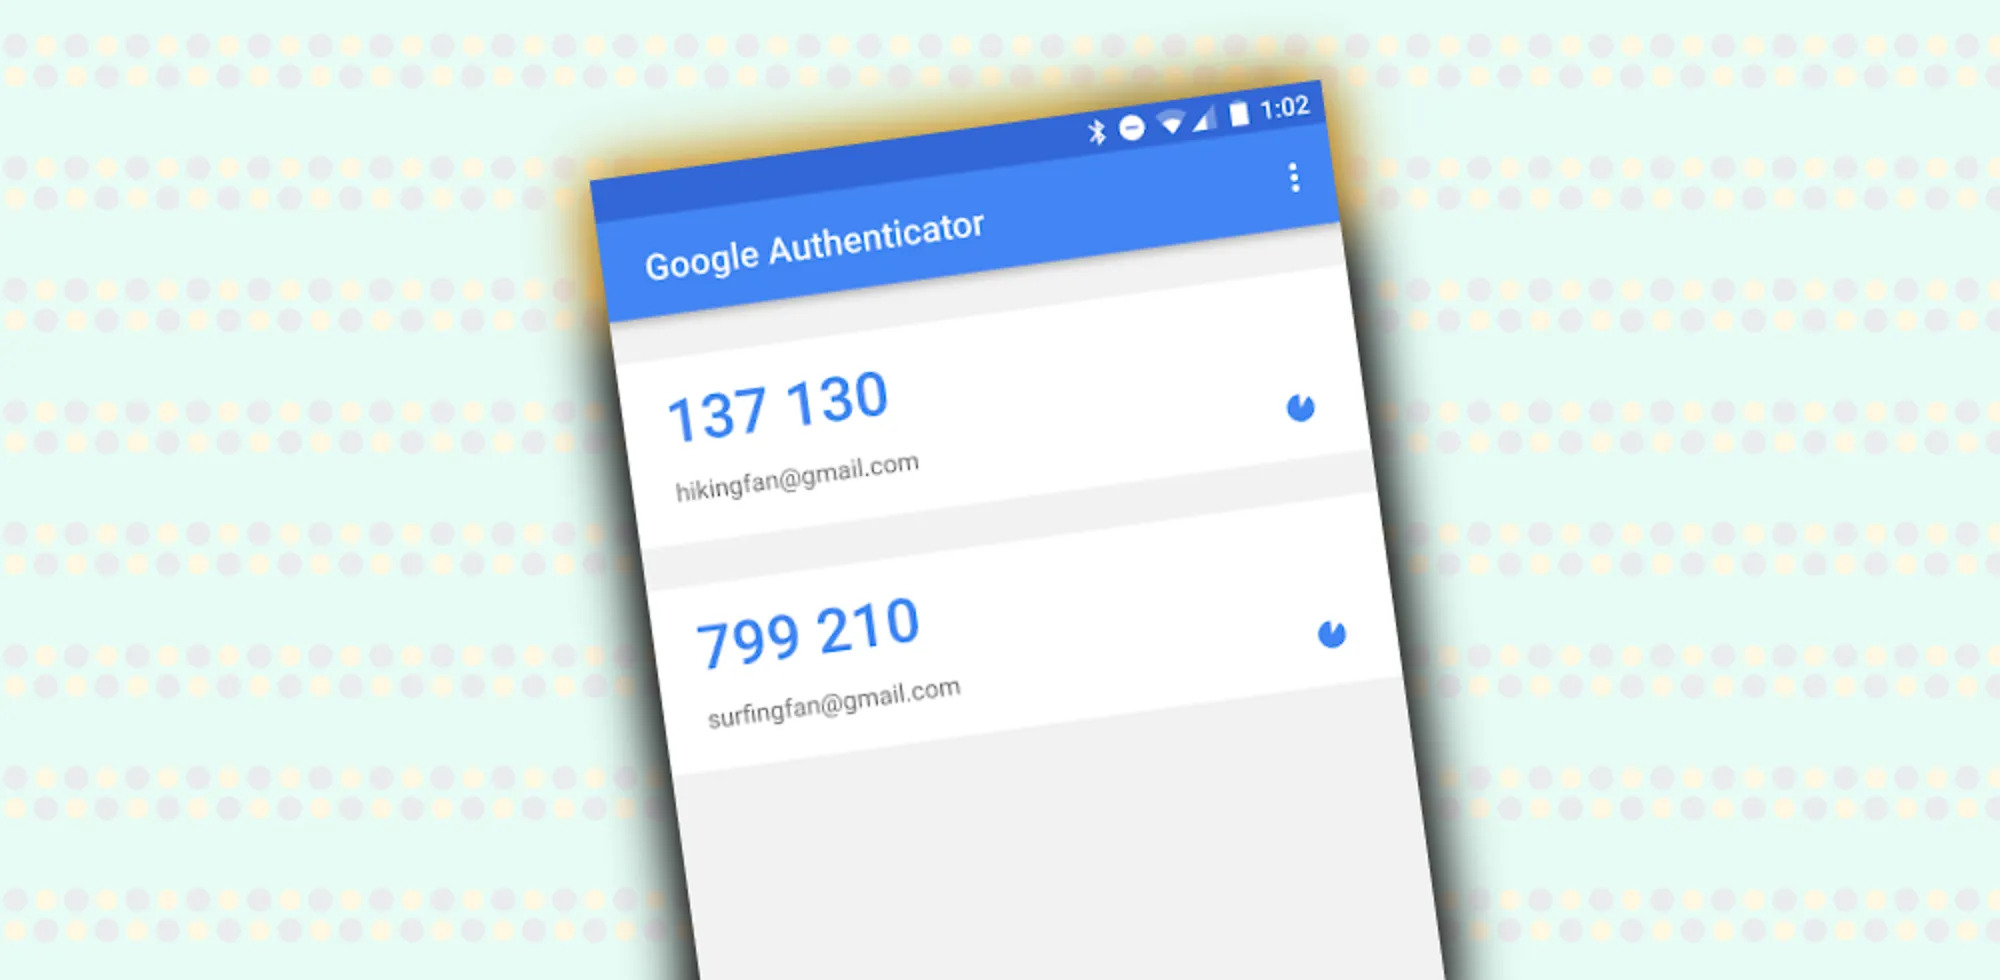 How Can I Get My Google Authenticator Code